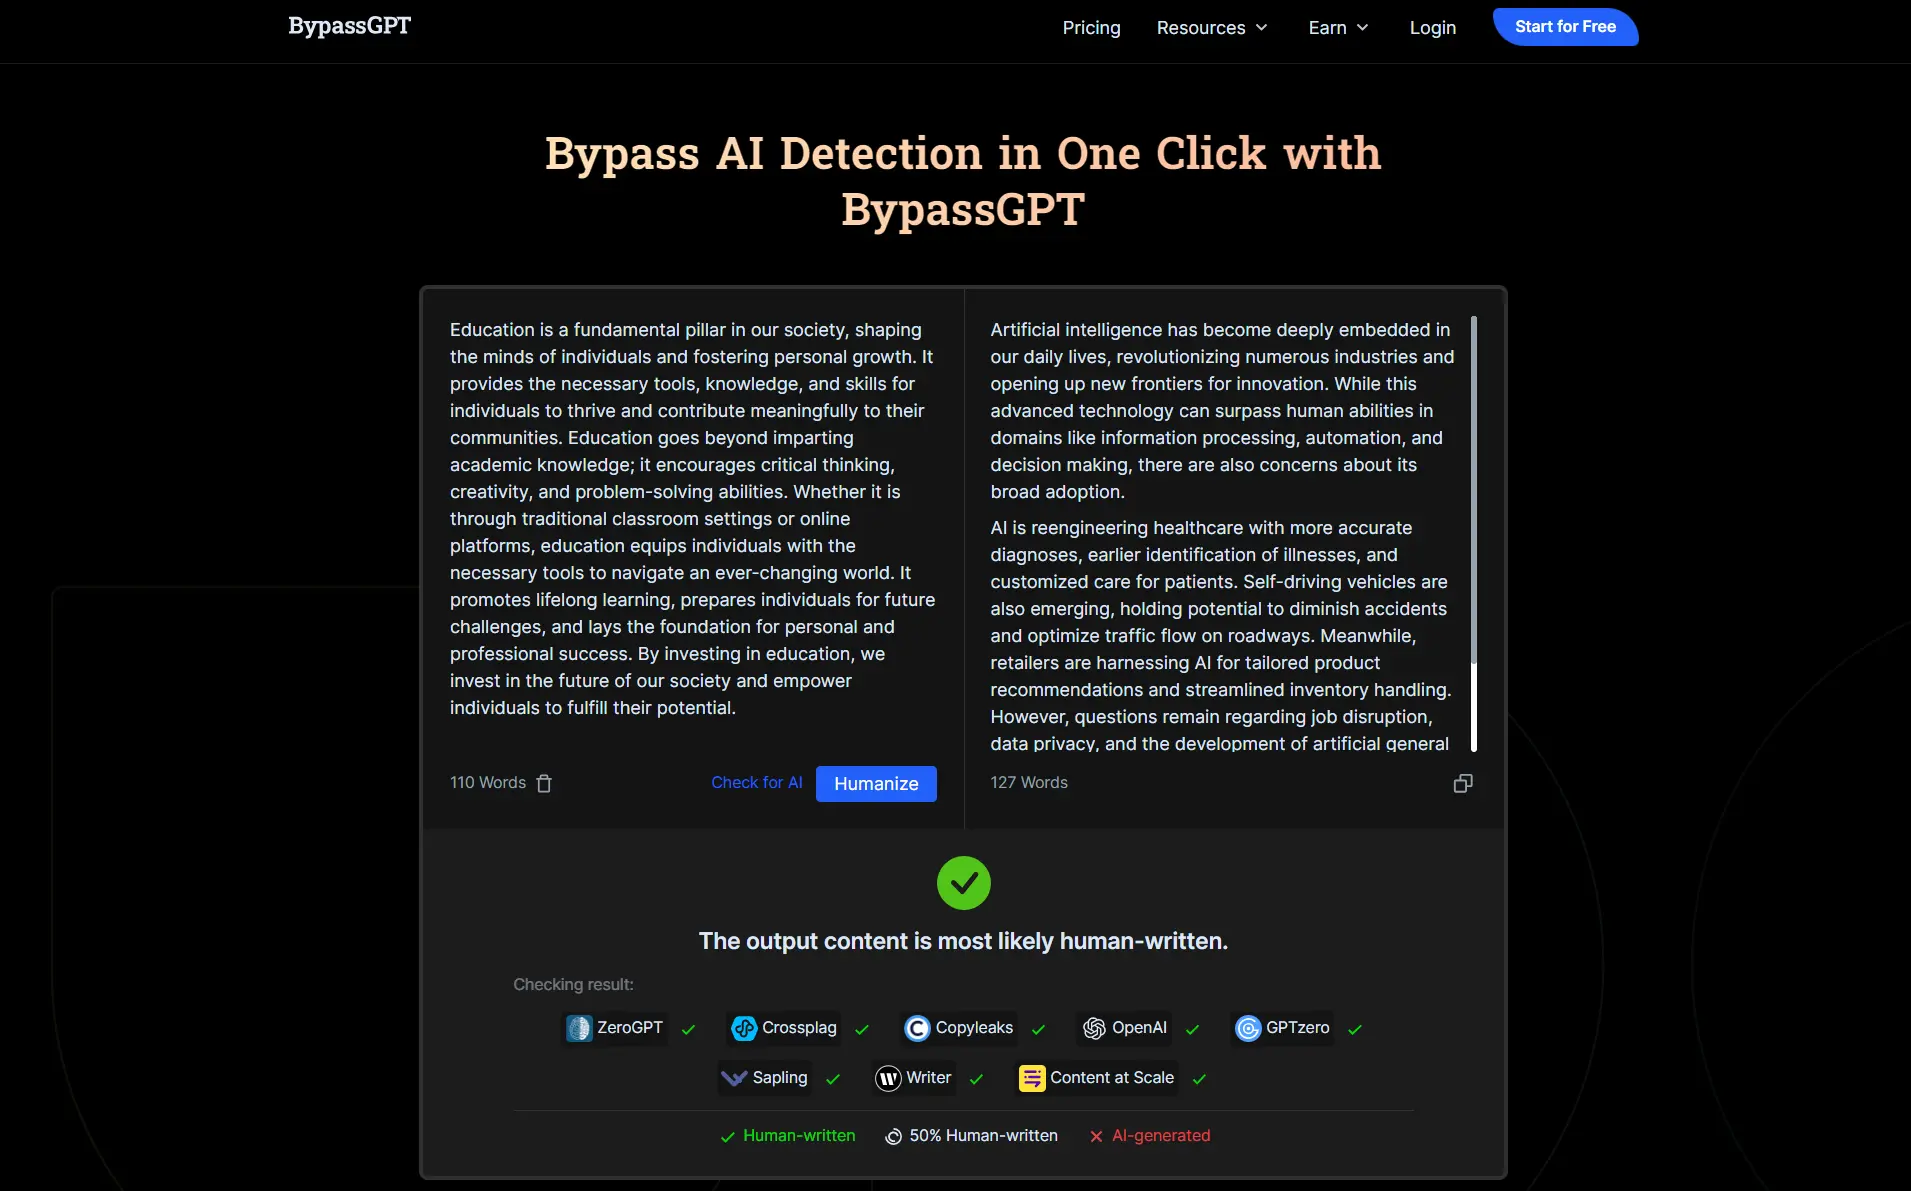 Bypass AI detection